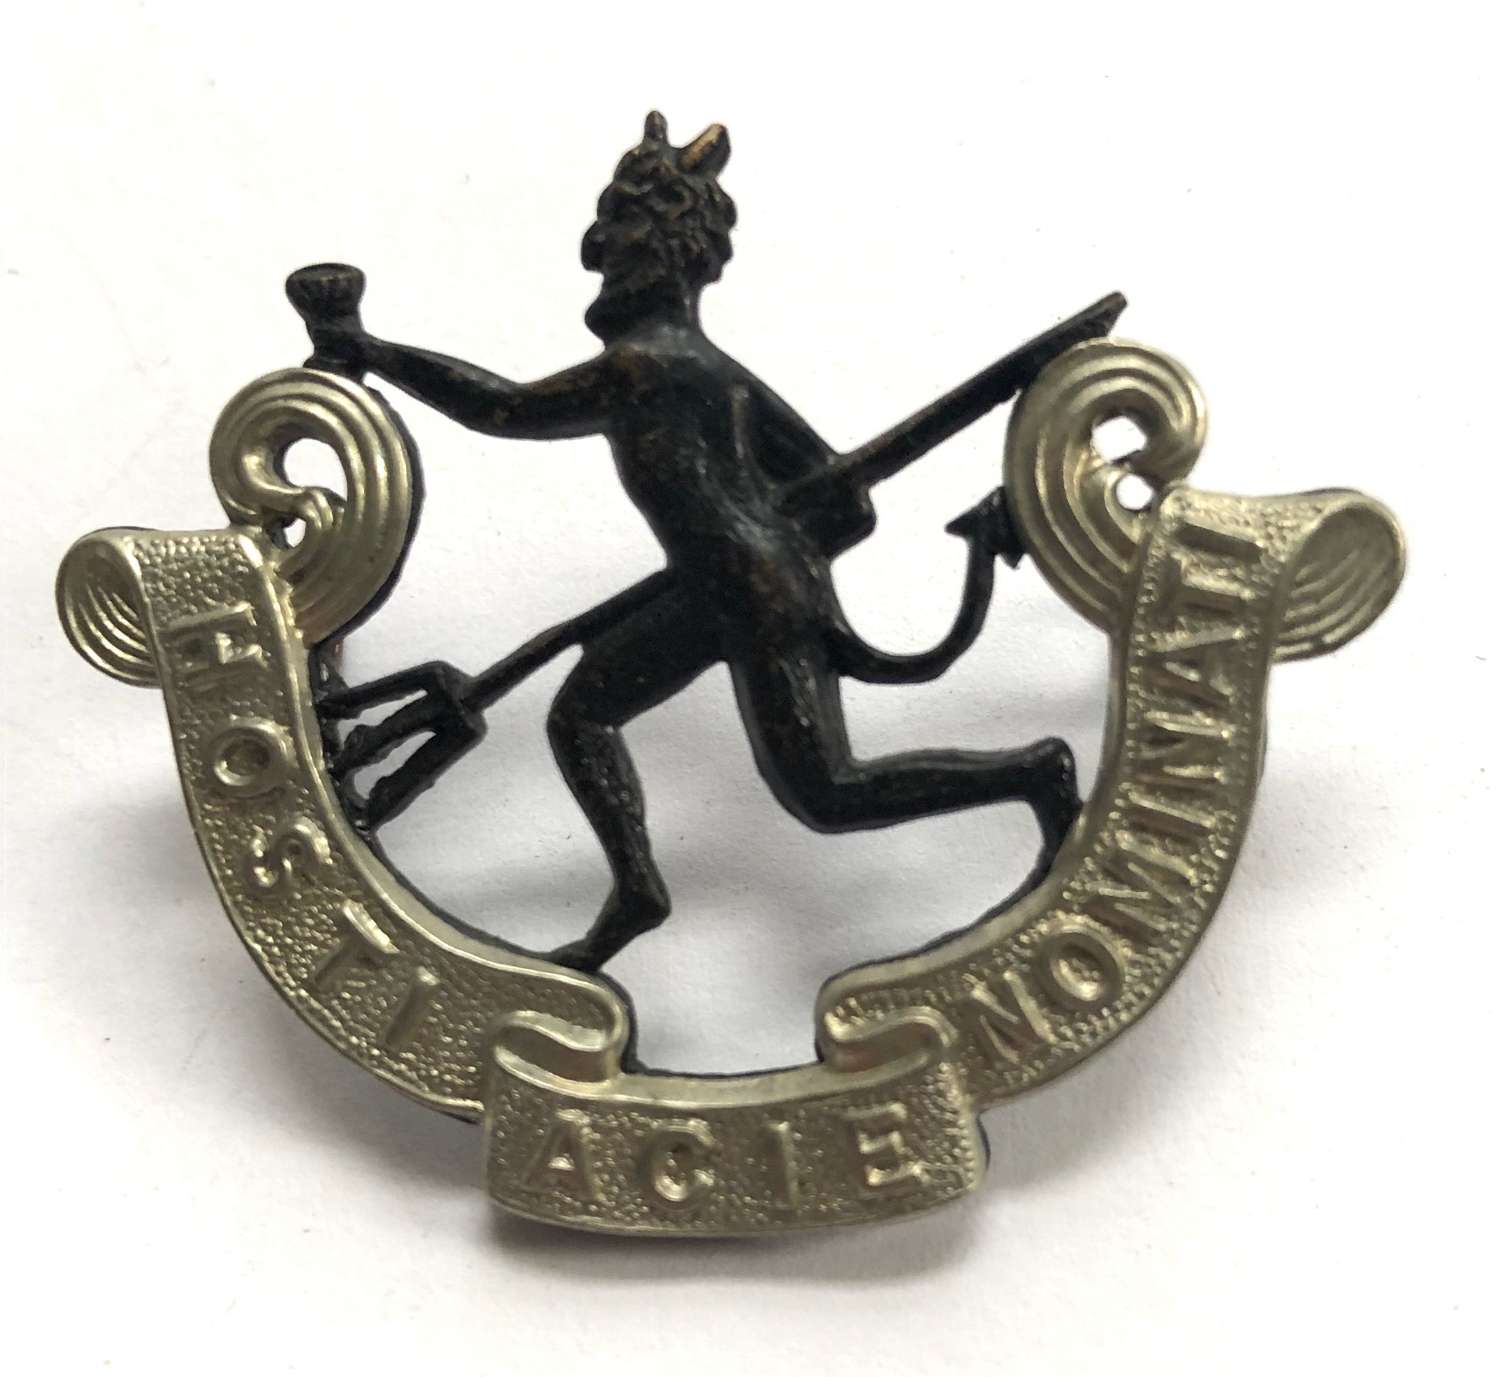 Canadian 8th Bn (Black Devils) CEF Officer's WW1 cap badge by Hicks